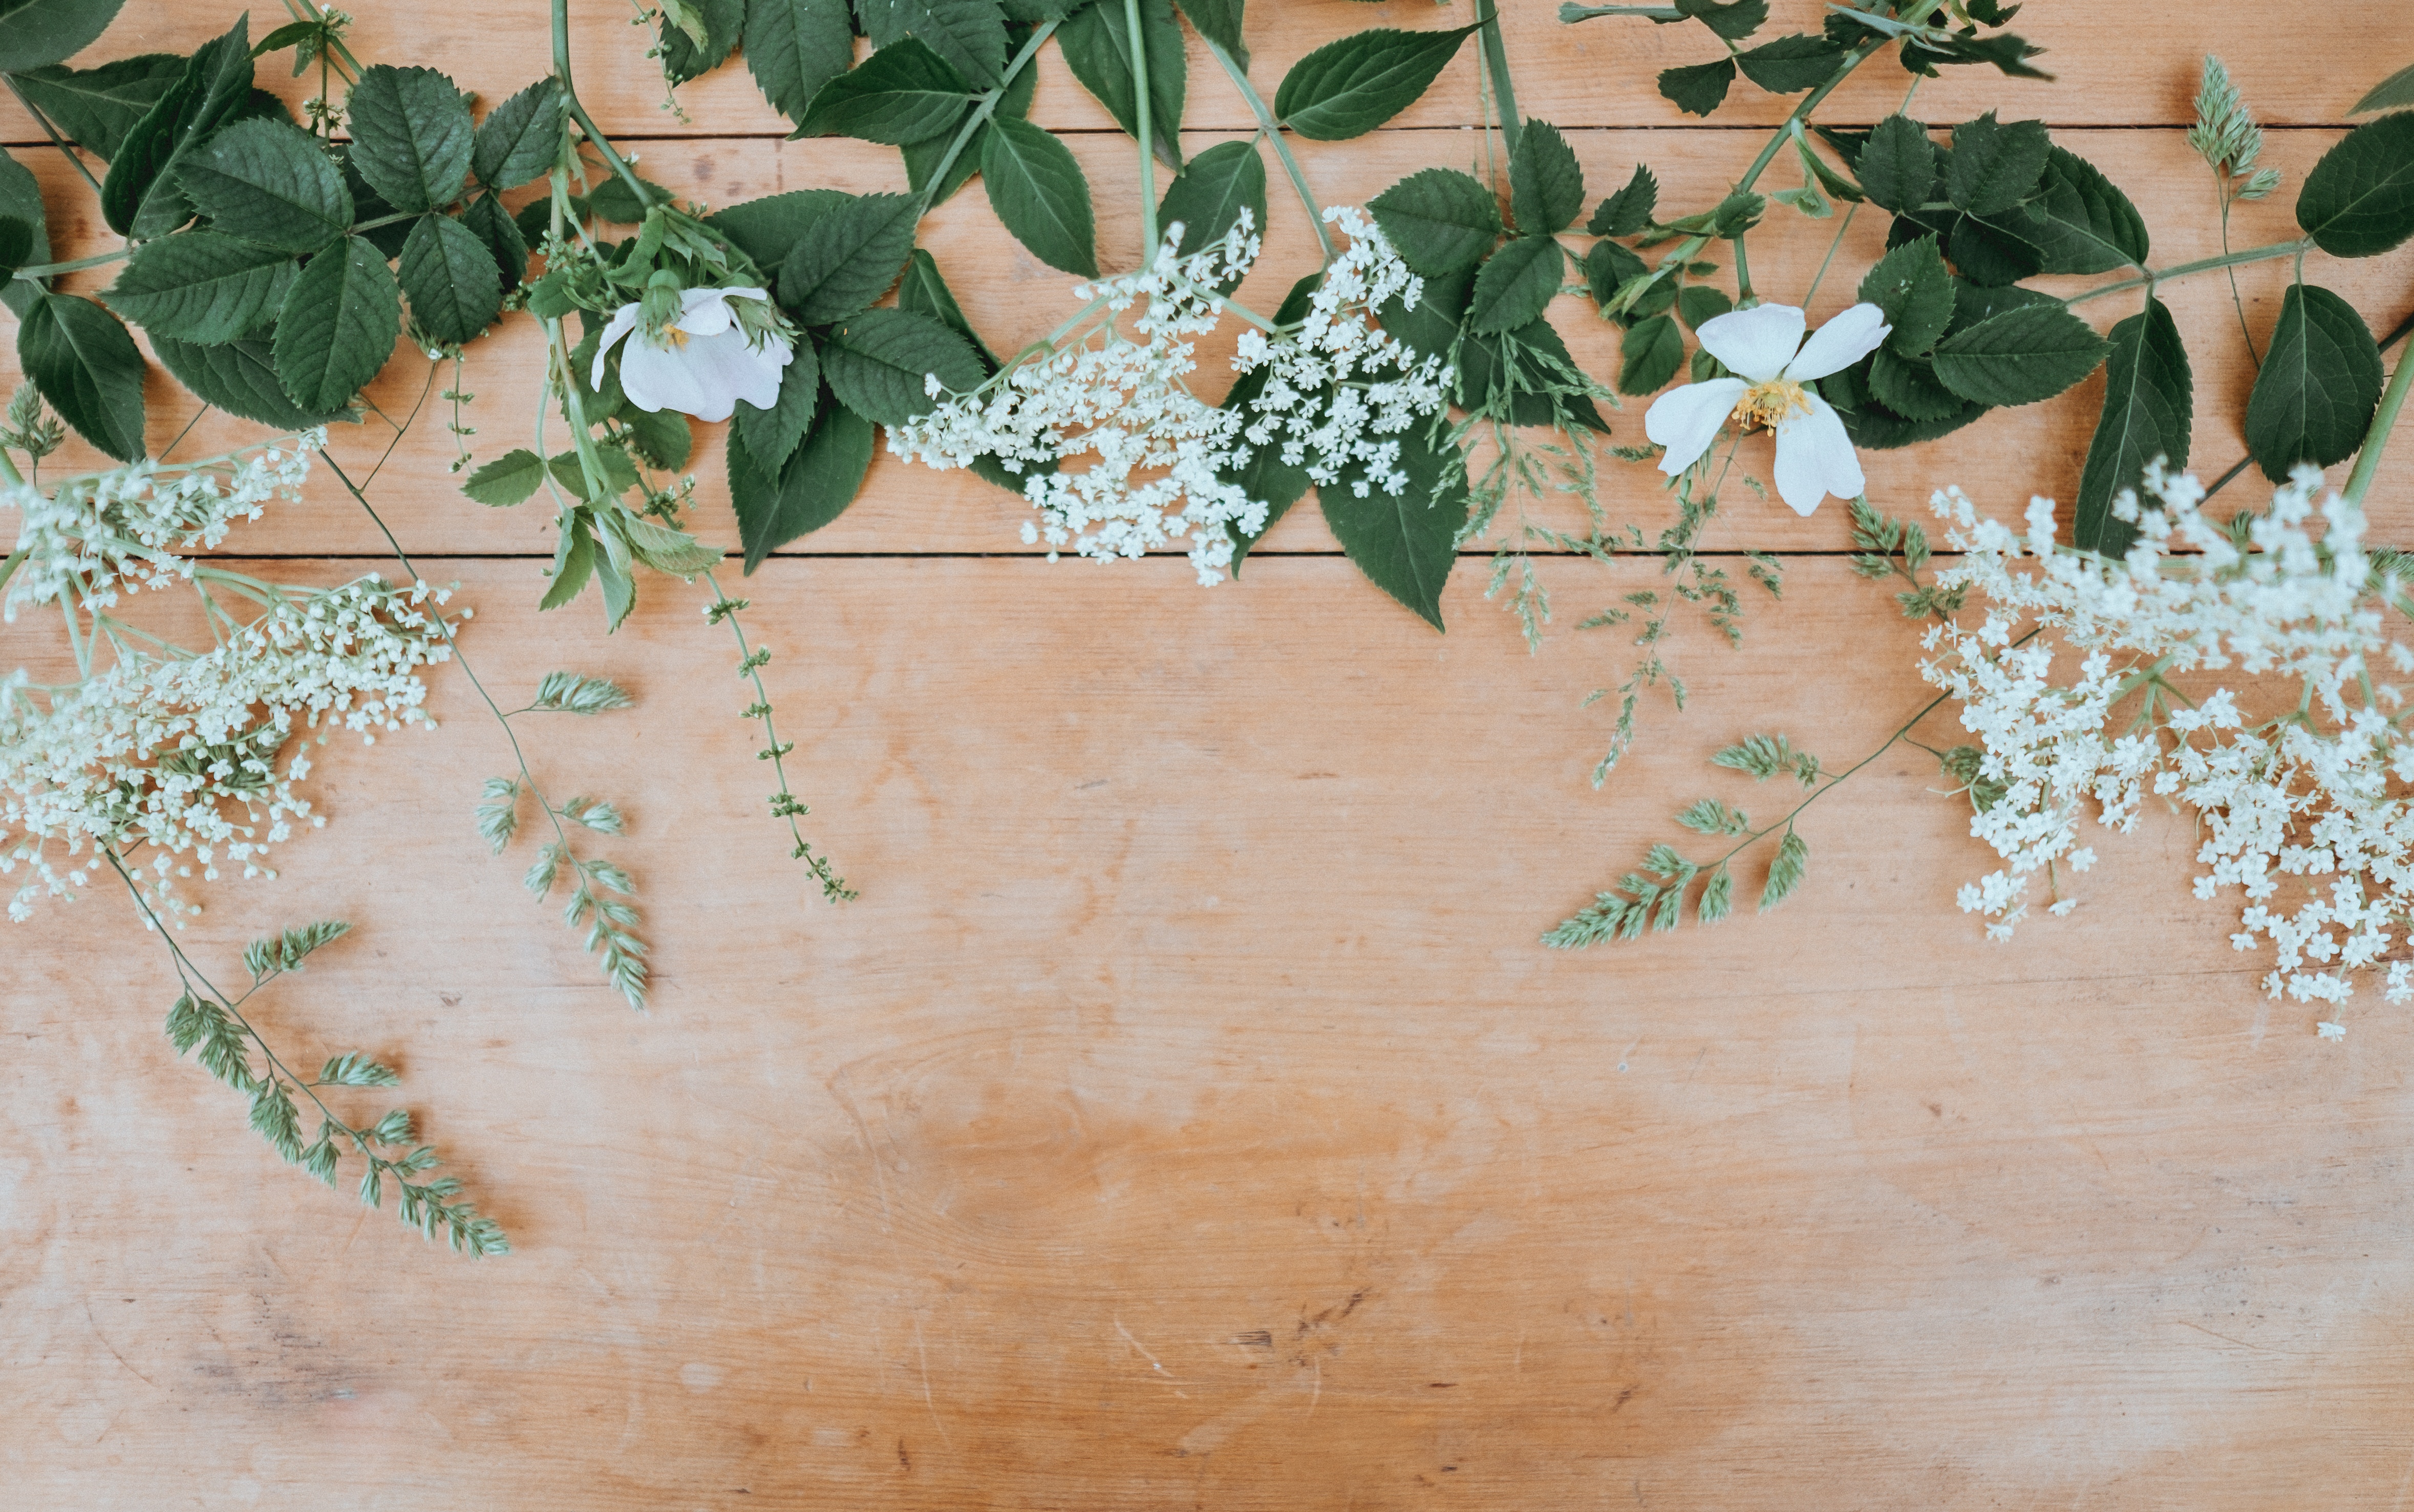 4715x2953 natural, Creative Commons image, wood, deaktop, overhead, leaves, border, flowers, babys breath, white, flatlay, floral, leafe, green, tabletop, flower